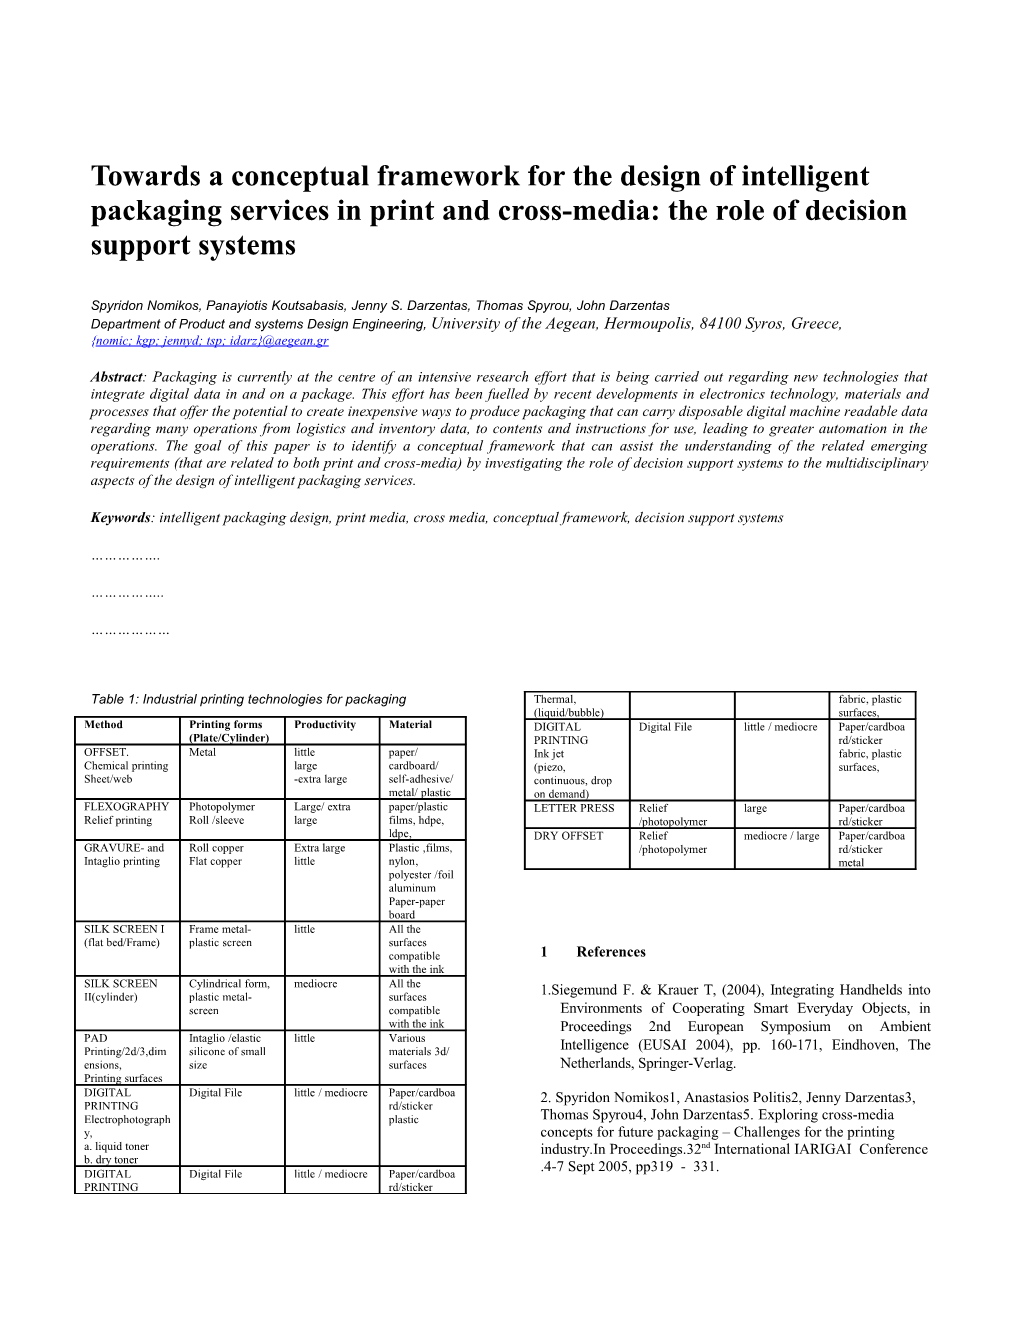 Title: Towards a Conceptual Framework for the Design of Smart Packaging Services in Print